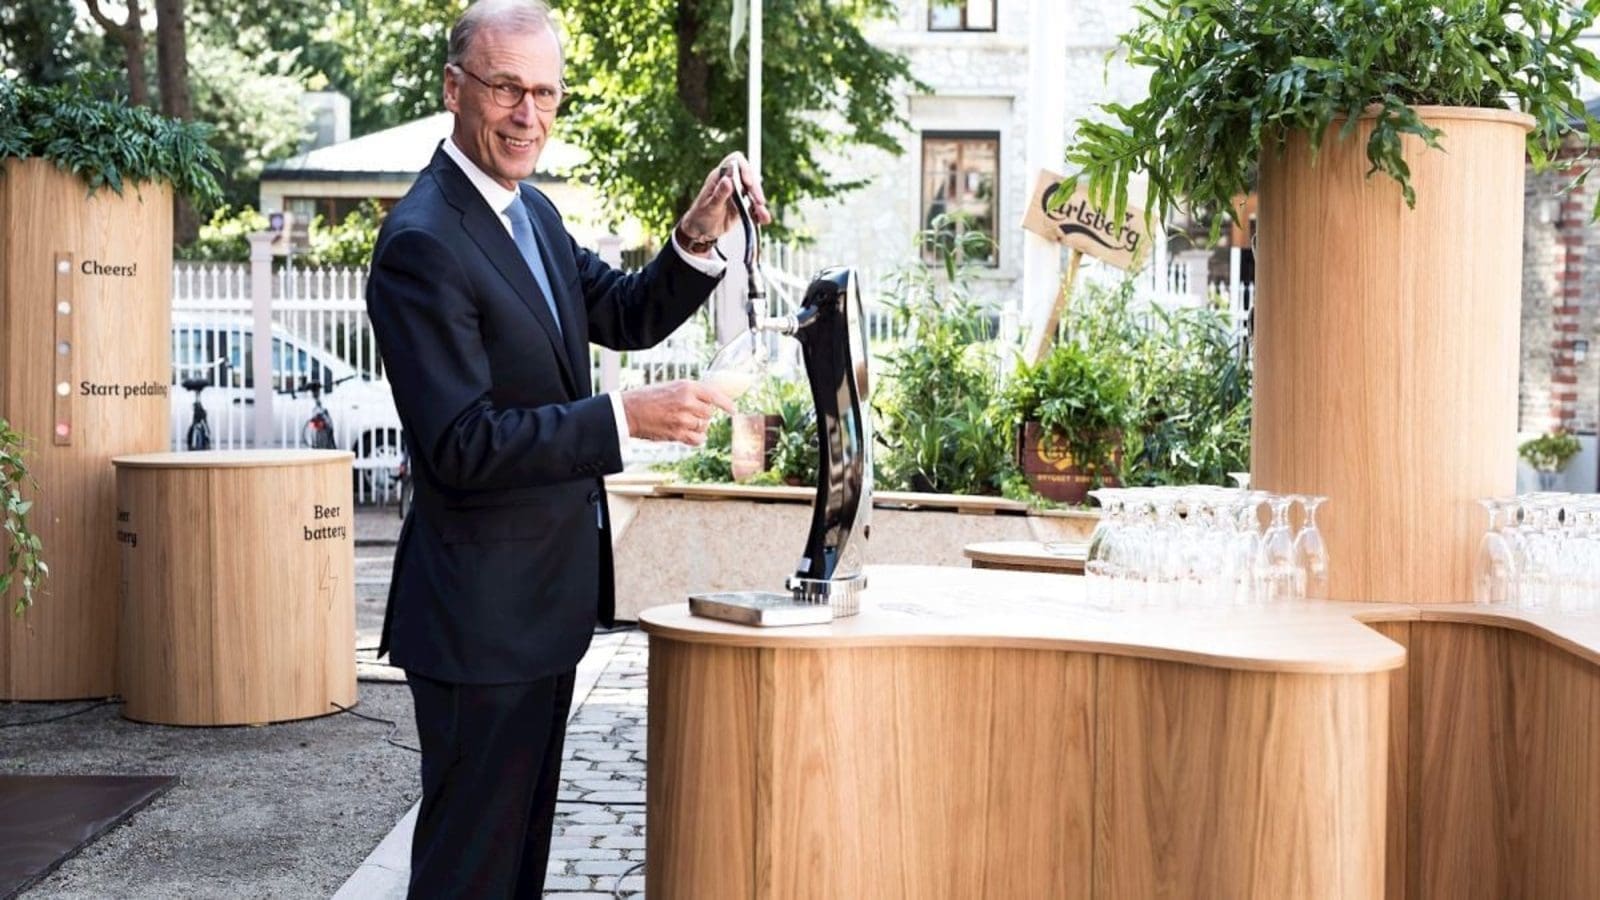 Carlsberg’s CEO Cees ’t Hart to retire in Q3 2023